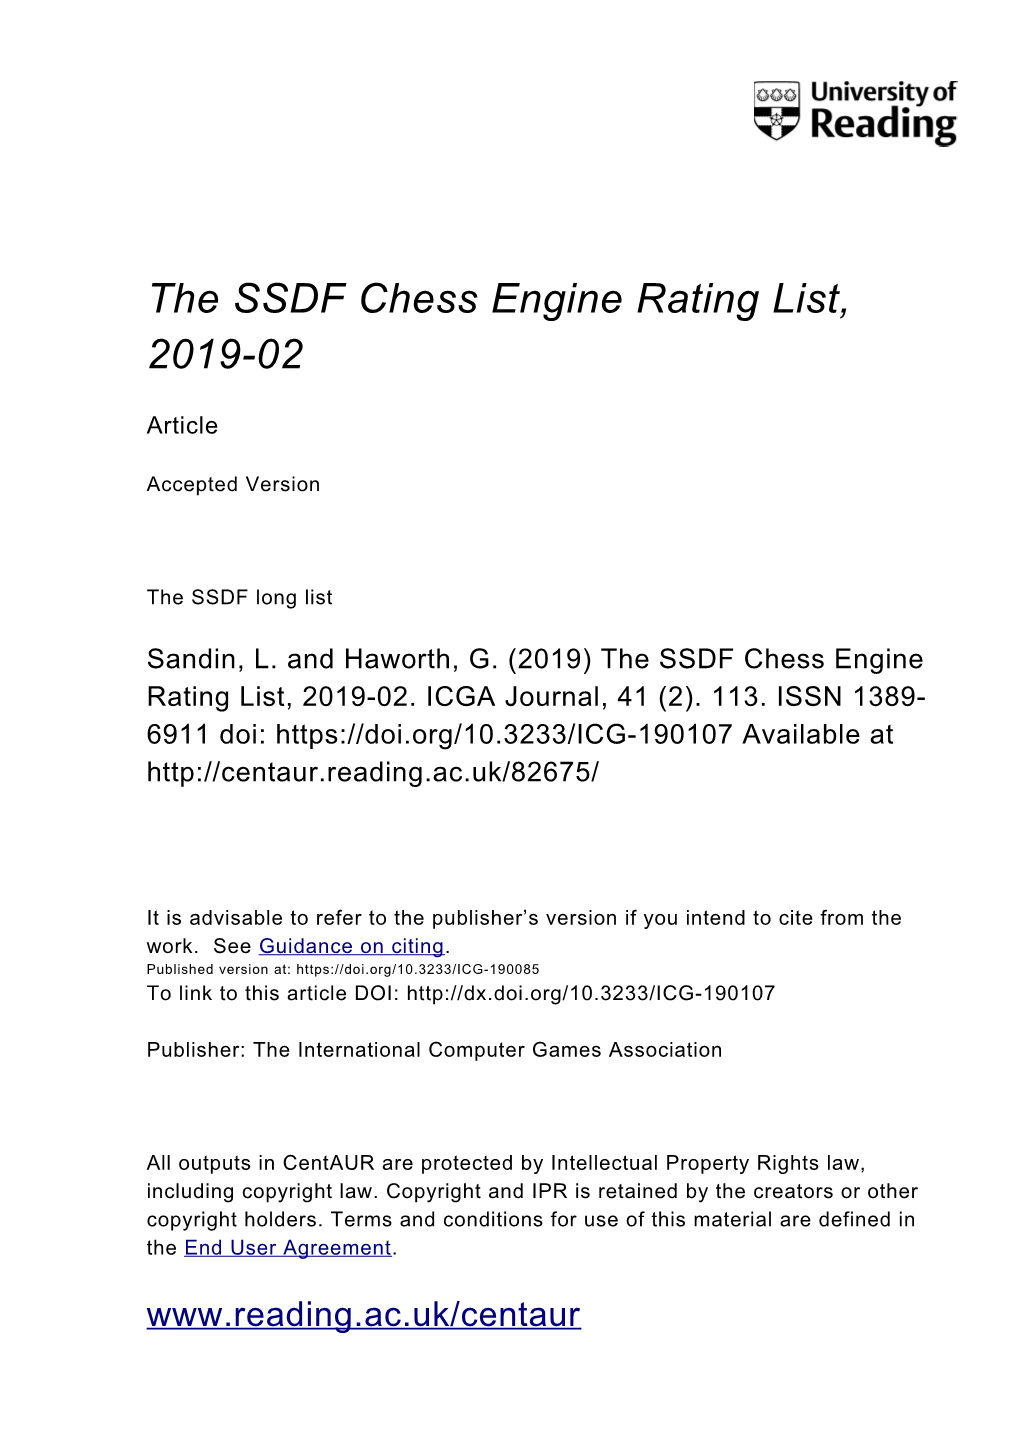 The SSDF Chess Engine Rating List, 2019-02